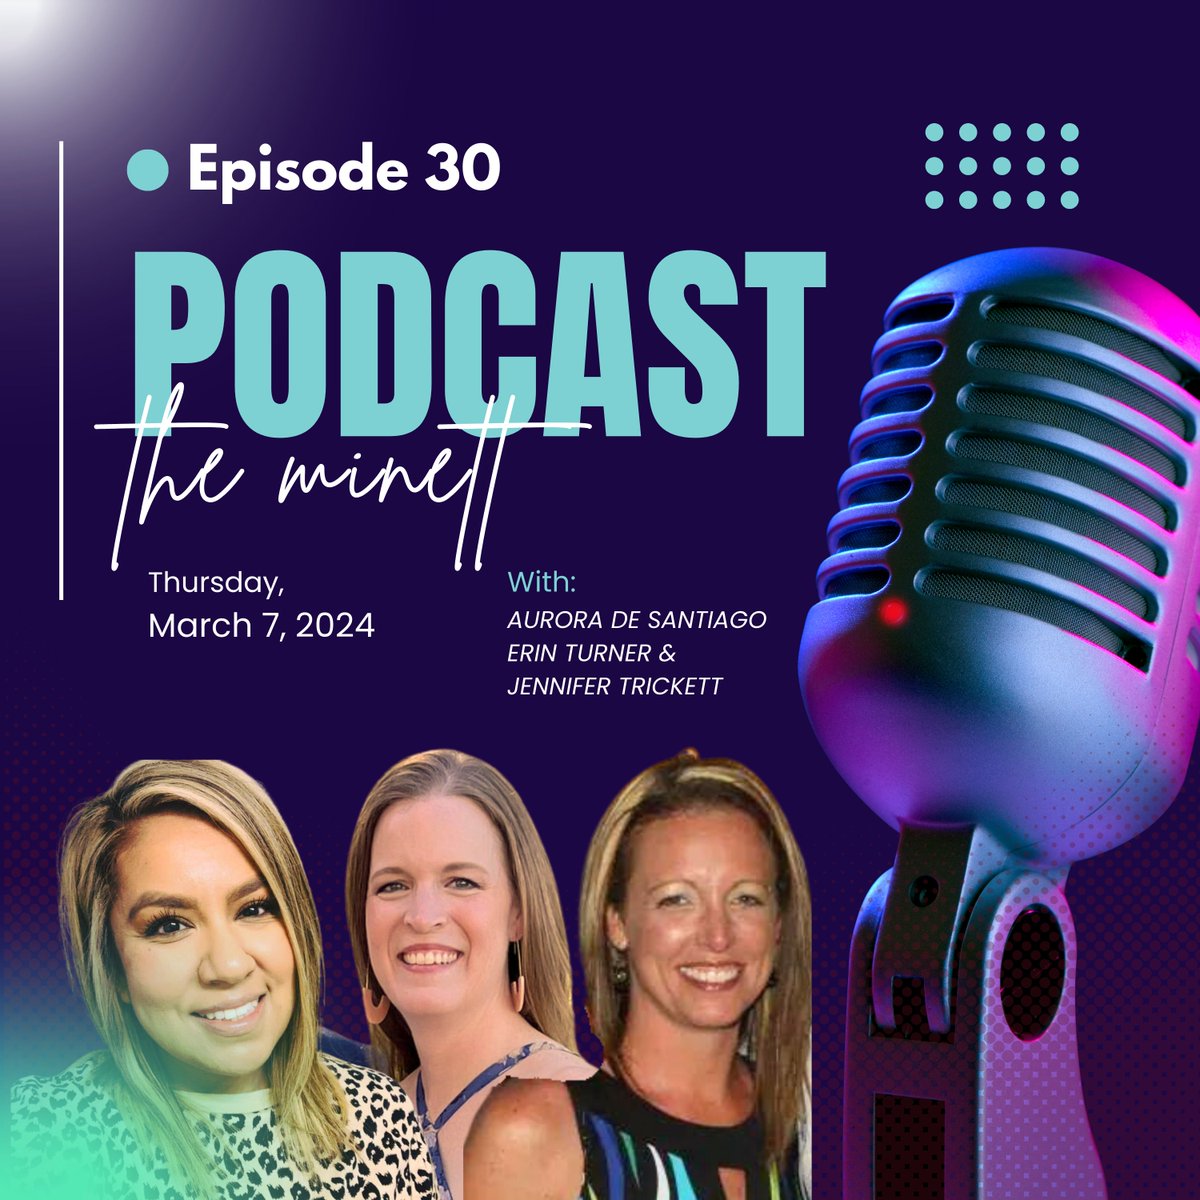 🌟 New Episode Alert! 🎙️ Tune into Episode 30 of the Minett Podcast, featuring an exclusive interview with our esteemed Elementary Curriculum Coordinators in Science & Social Studies - @AuroraDS5, Jennifer Trickett, and Erin Turner. #TheMinettConnection 📺 youtube.com/watch?v=SM-az8…